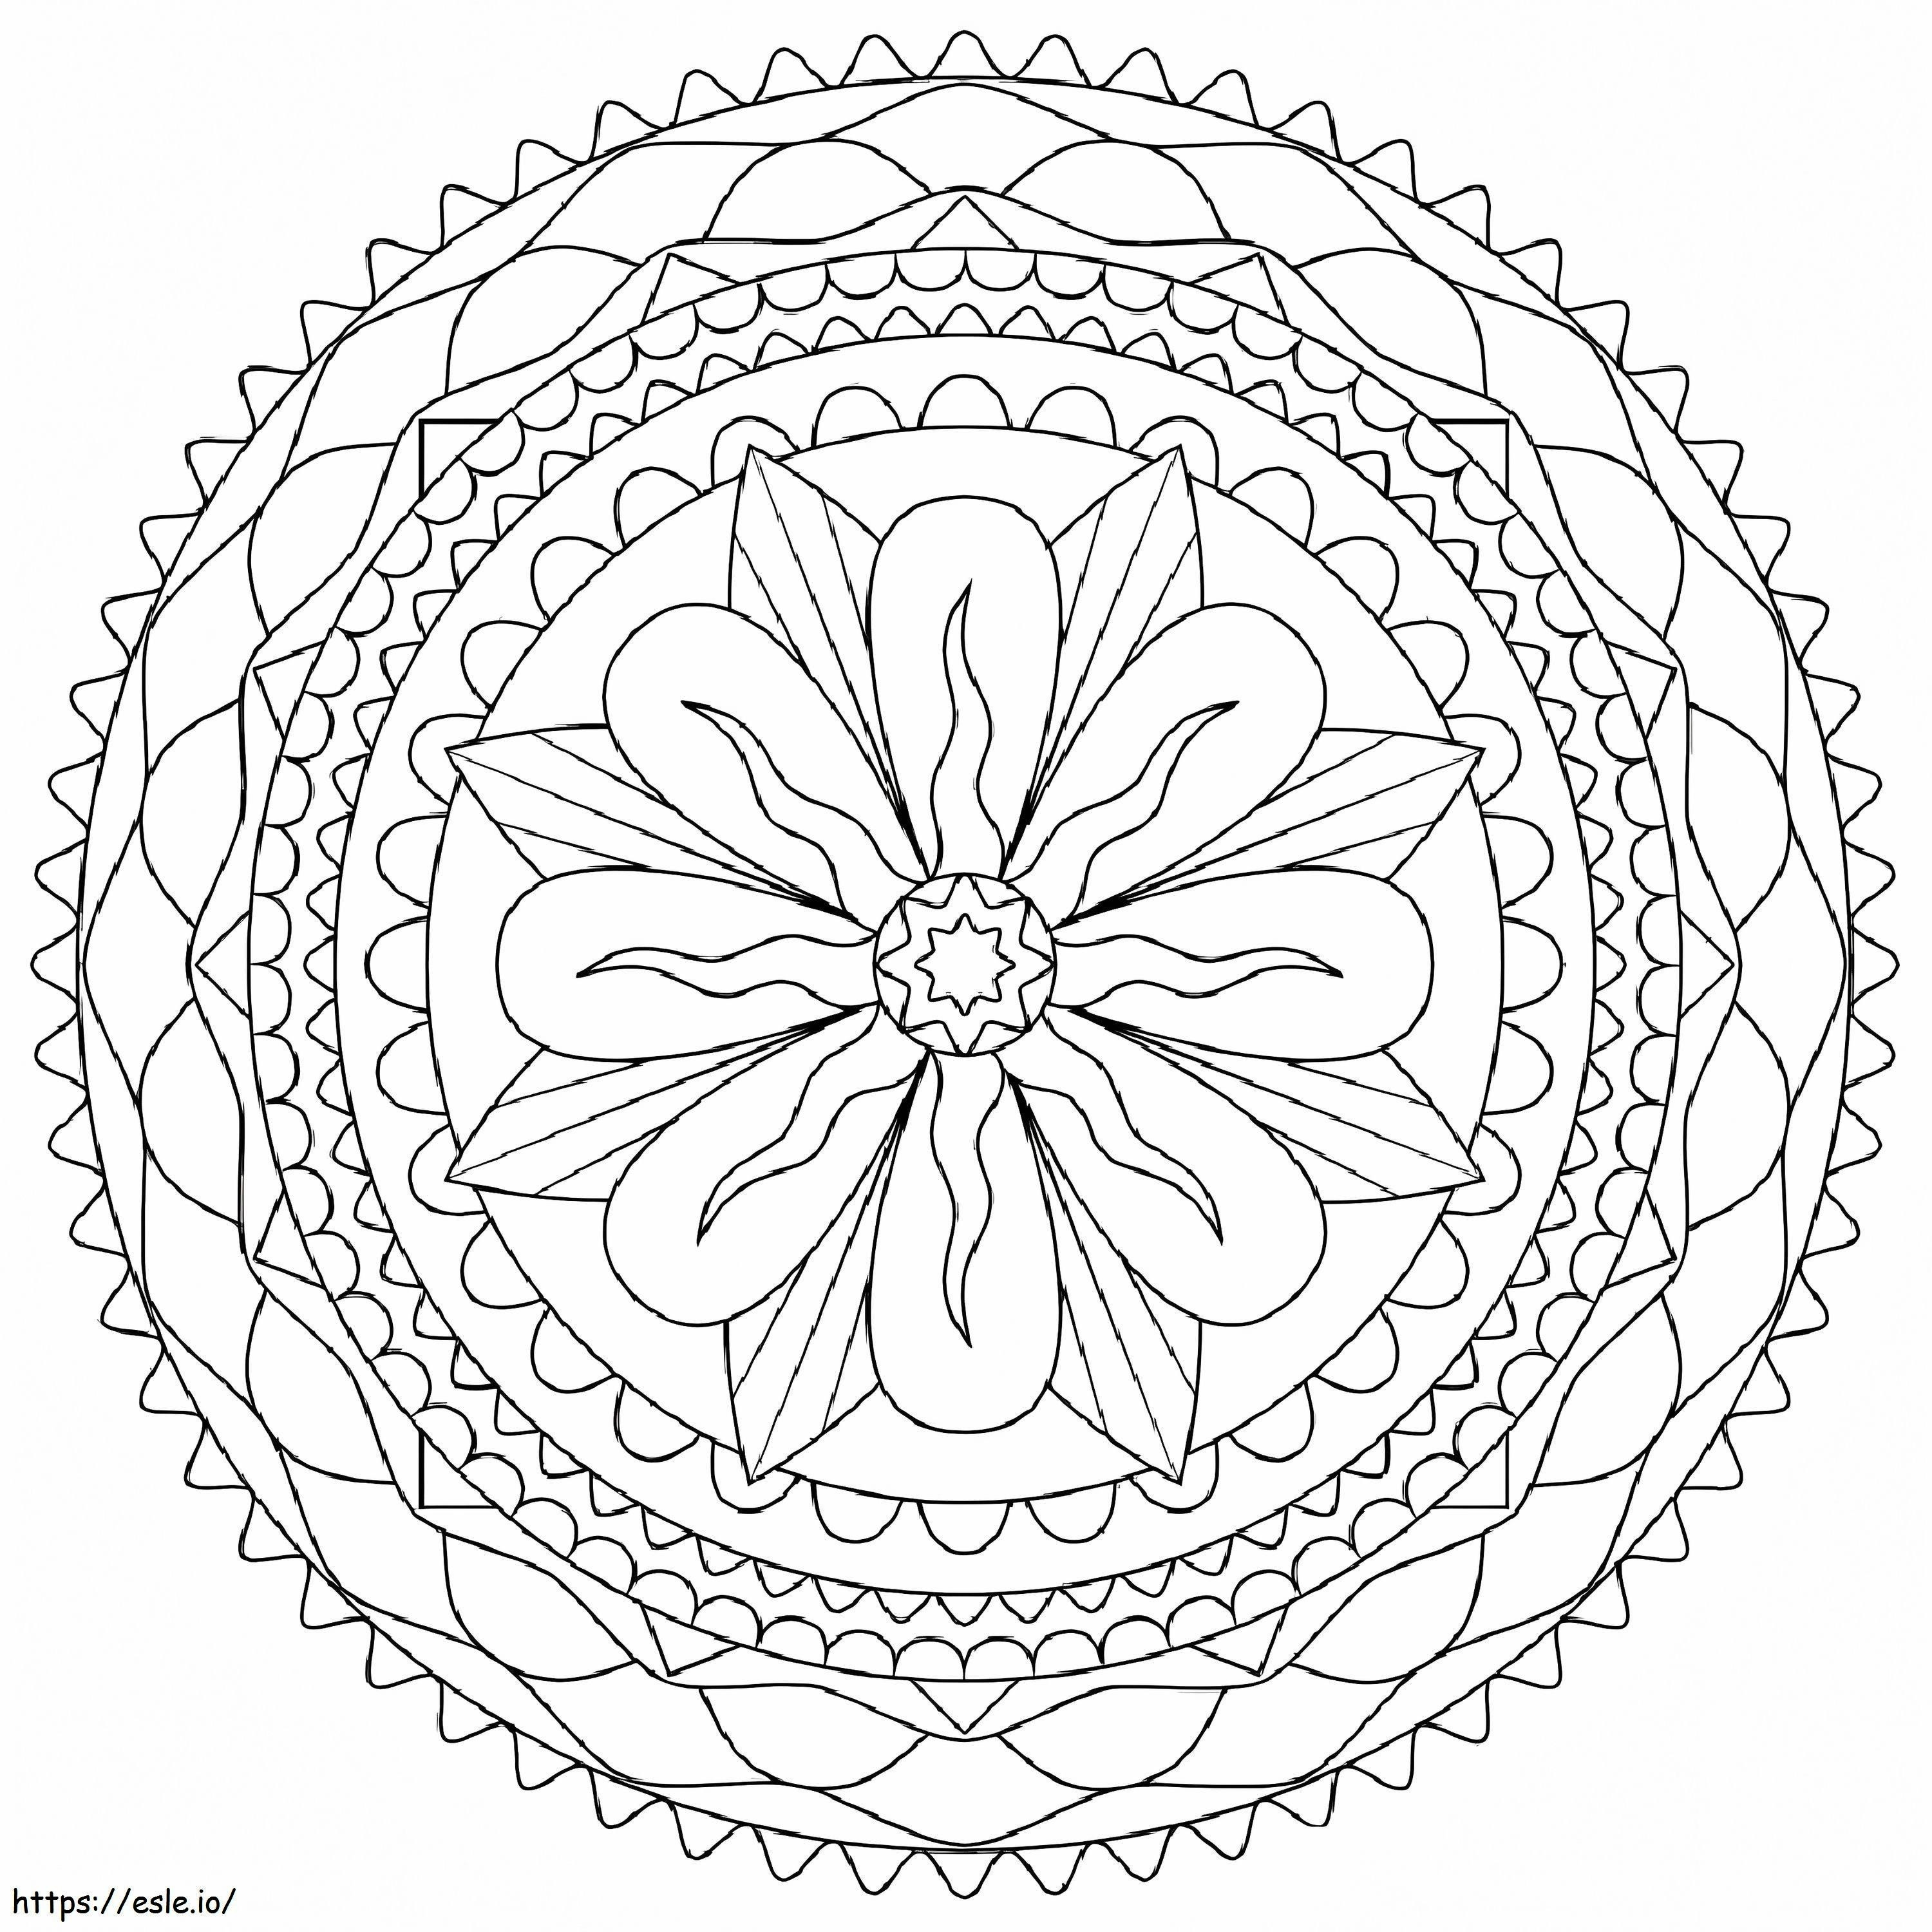 Printable Summary coloring page